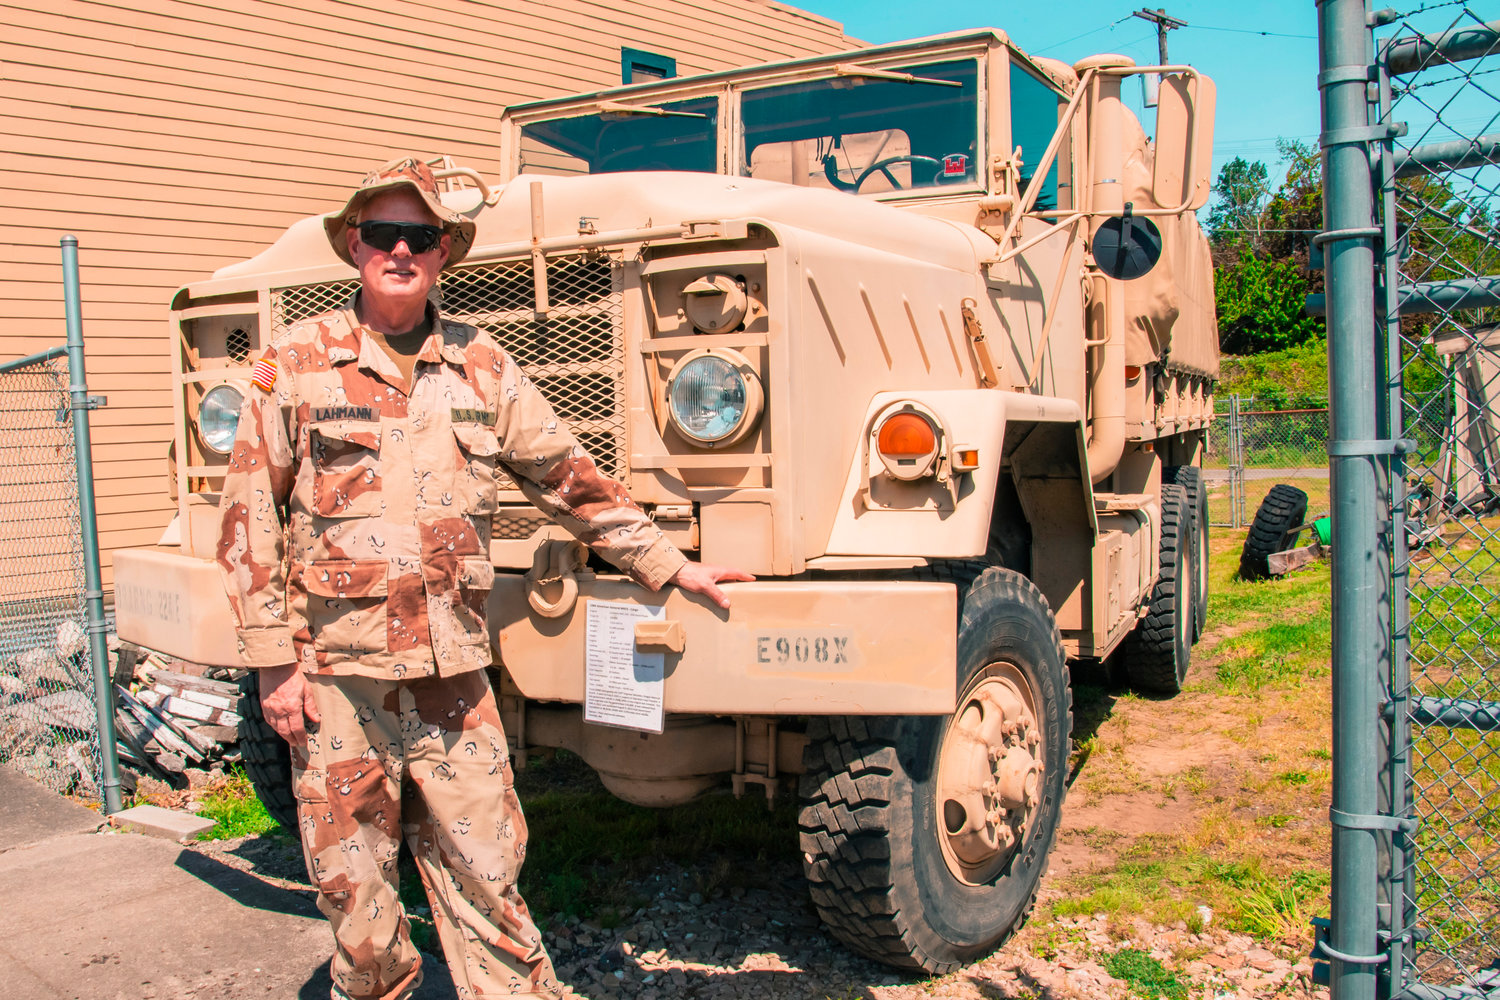 Peter Lahmann poses for a photo sporting desert gear next to a military vehicle he owns and drives through downtown Centralia.